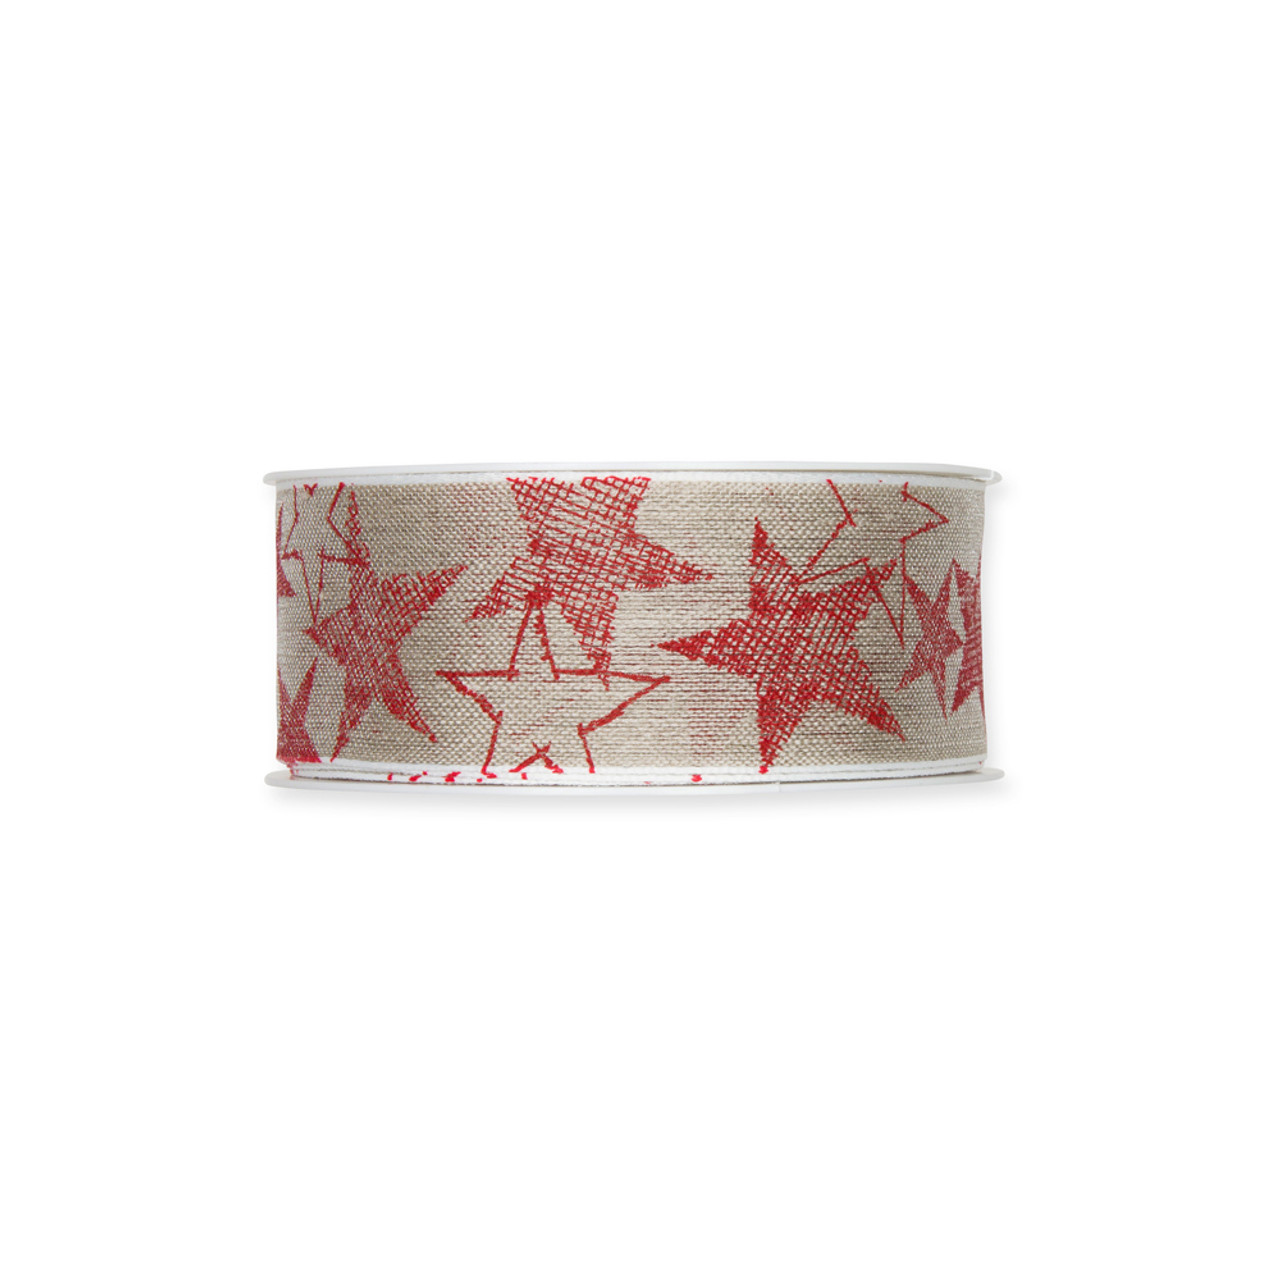 Linen Ribbon With Red Star Printed Motif 4cm/1.5 Inches Wide Natural